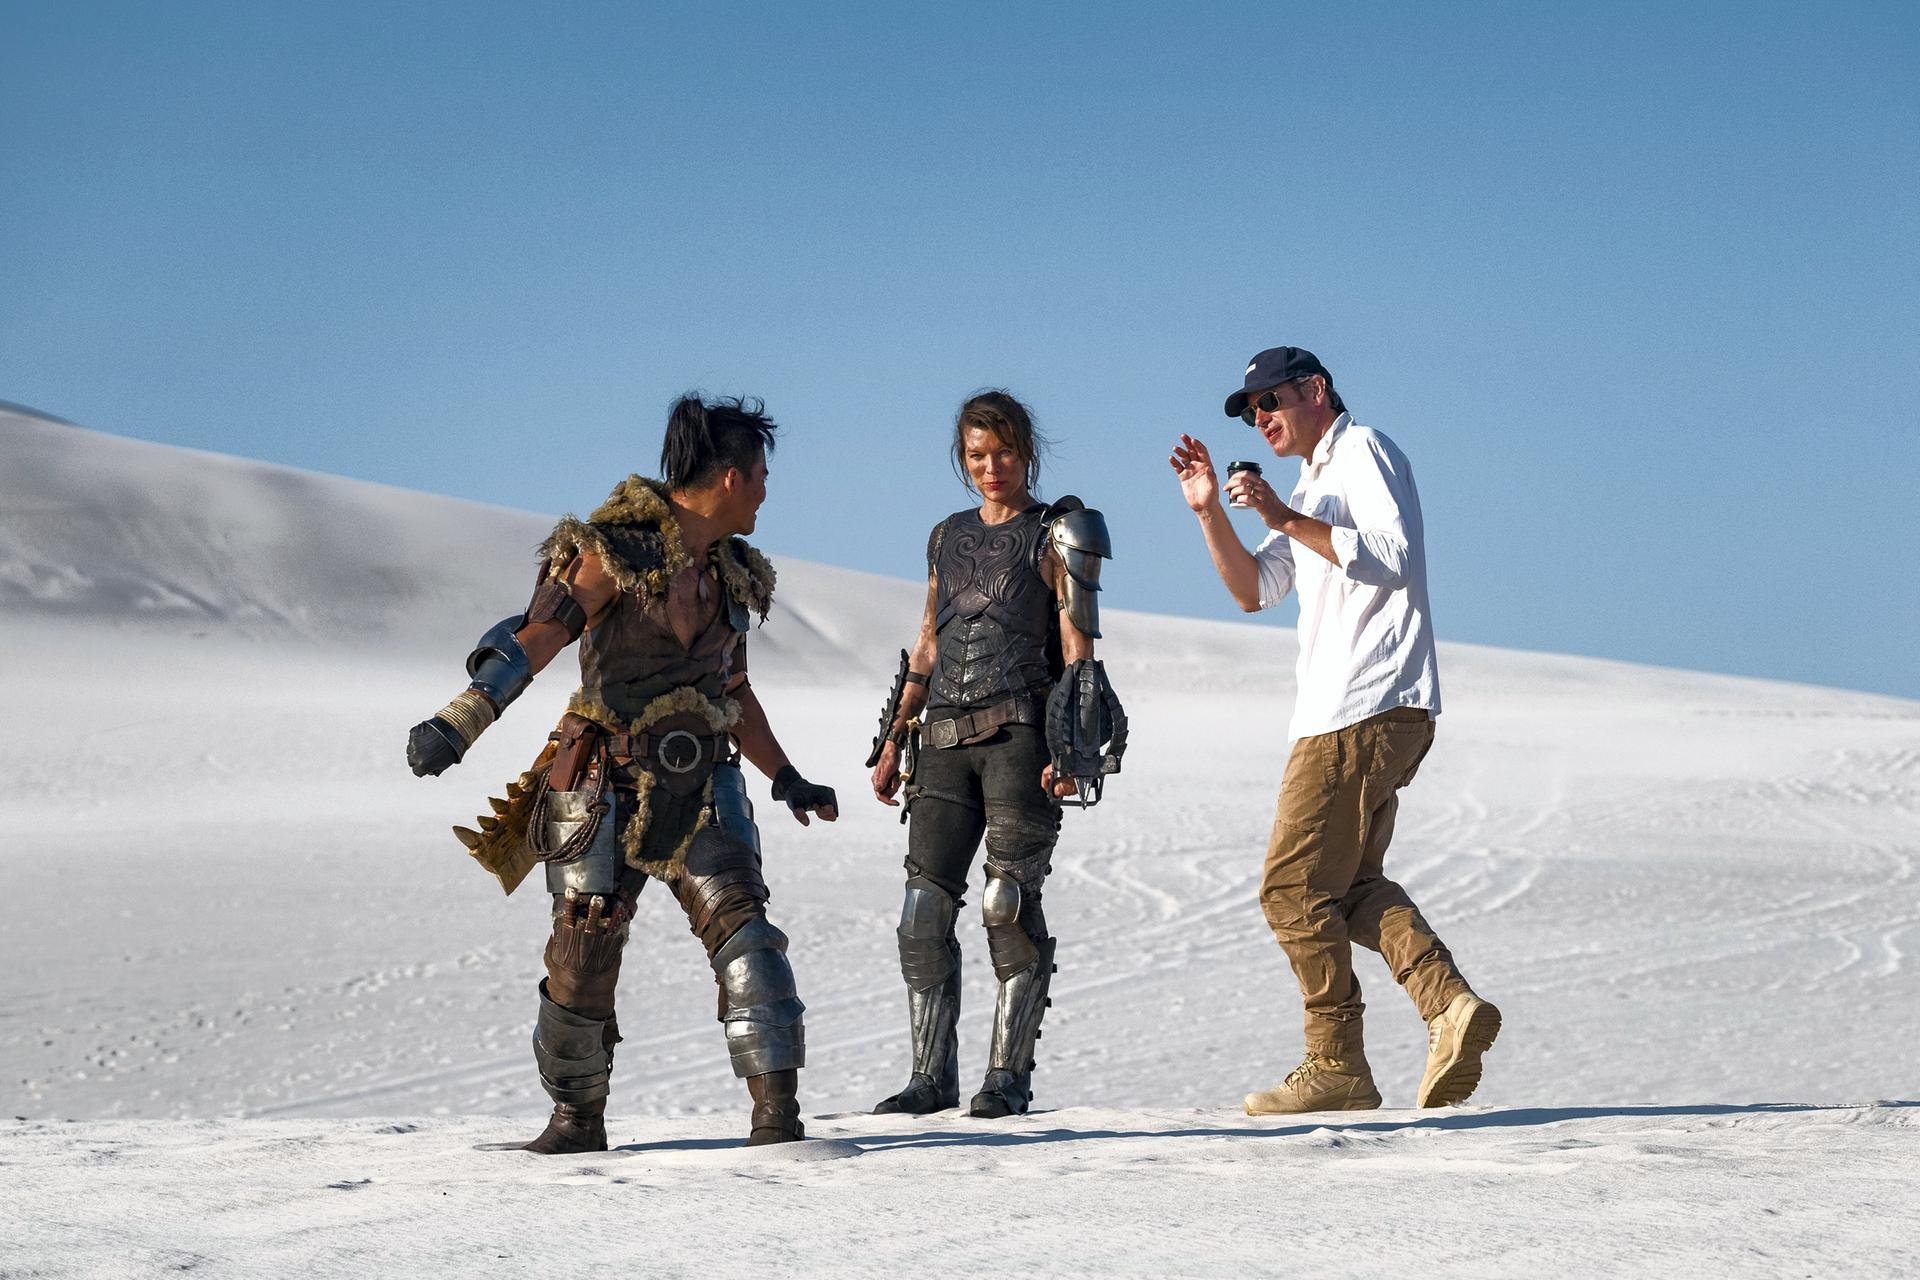 Monster Hunter' Review: A VFX Heavy Paul W.S. Anderson Movie Starring Milla  Jovovich And Tony Jaa - Entertainment